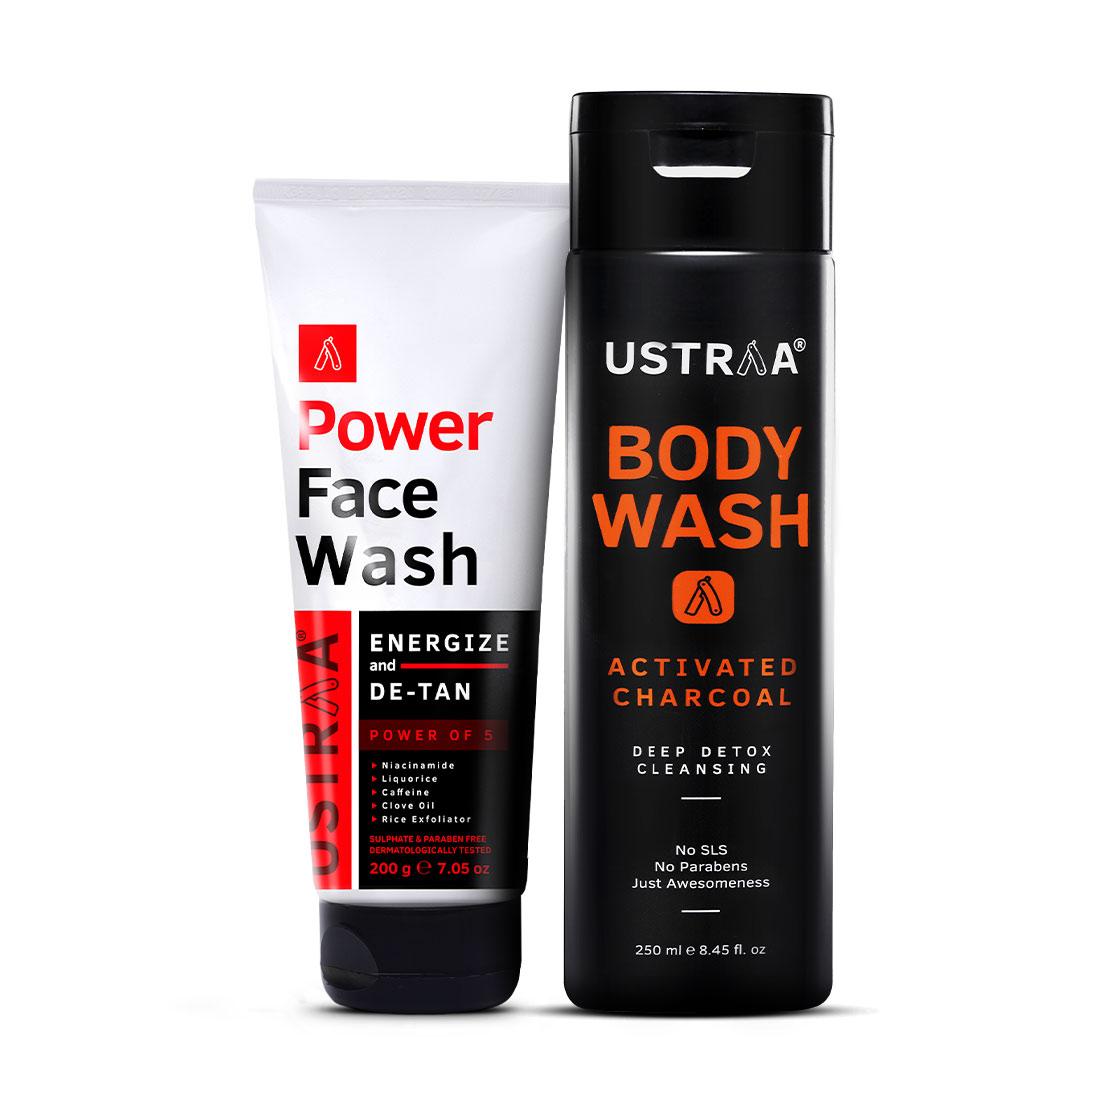 Power Face Wash Energize & Activated Charcoal Body Wash